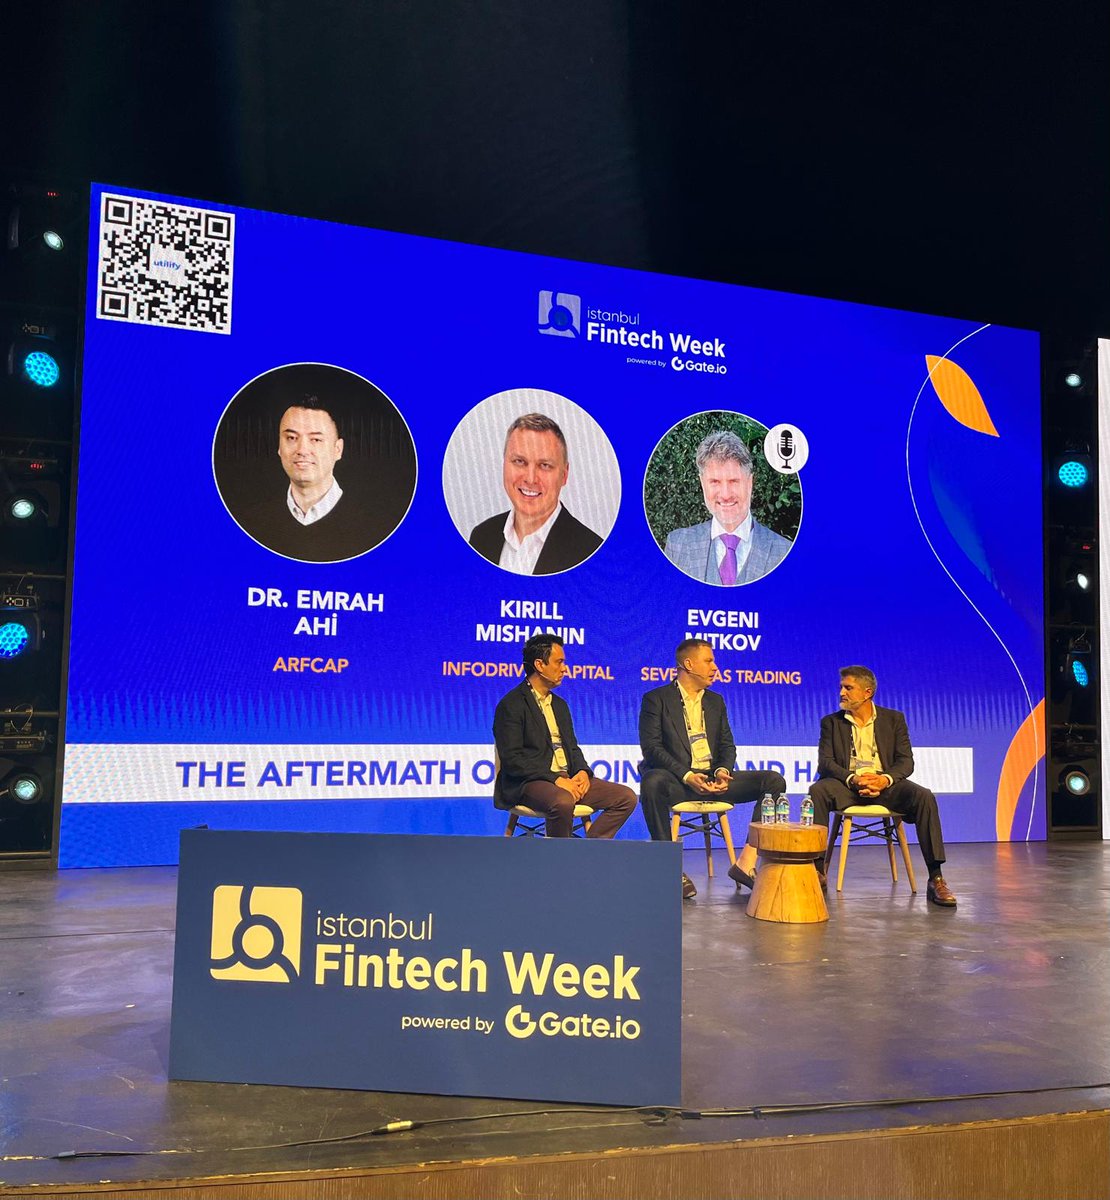 We are discussing “The aftermath of Bitcoin ETFs and Halving” with @DrEmrahAhi and @flydefi Moderator: Evgeni Mitkov. 📍Main Hall #IstanbulFintechWeek #IFW24 #Istanbul